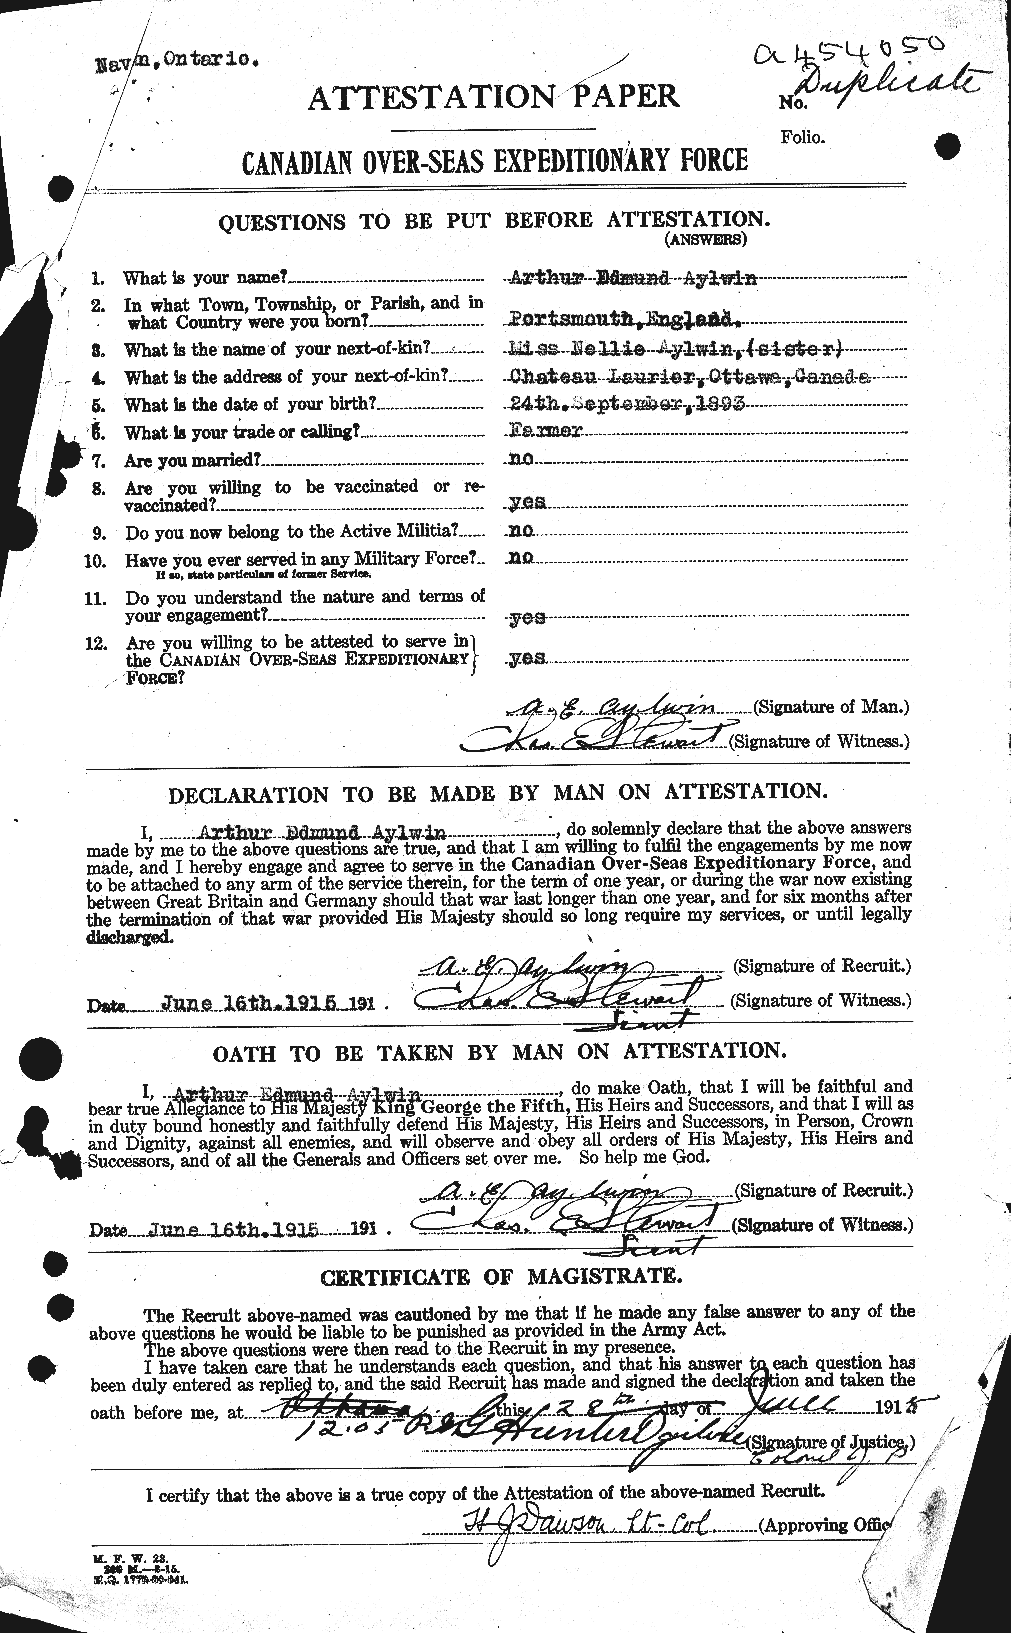 Personnel Records of the First World War - CEF 215727a